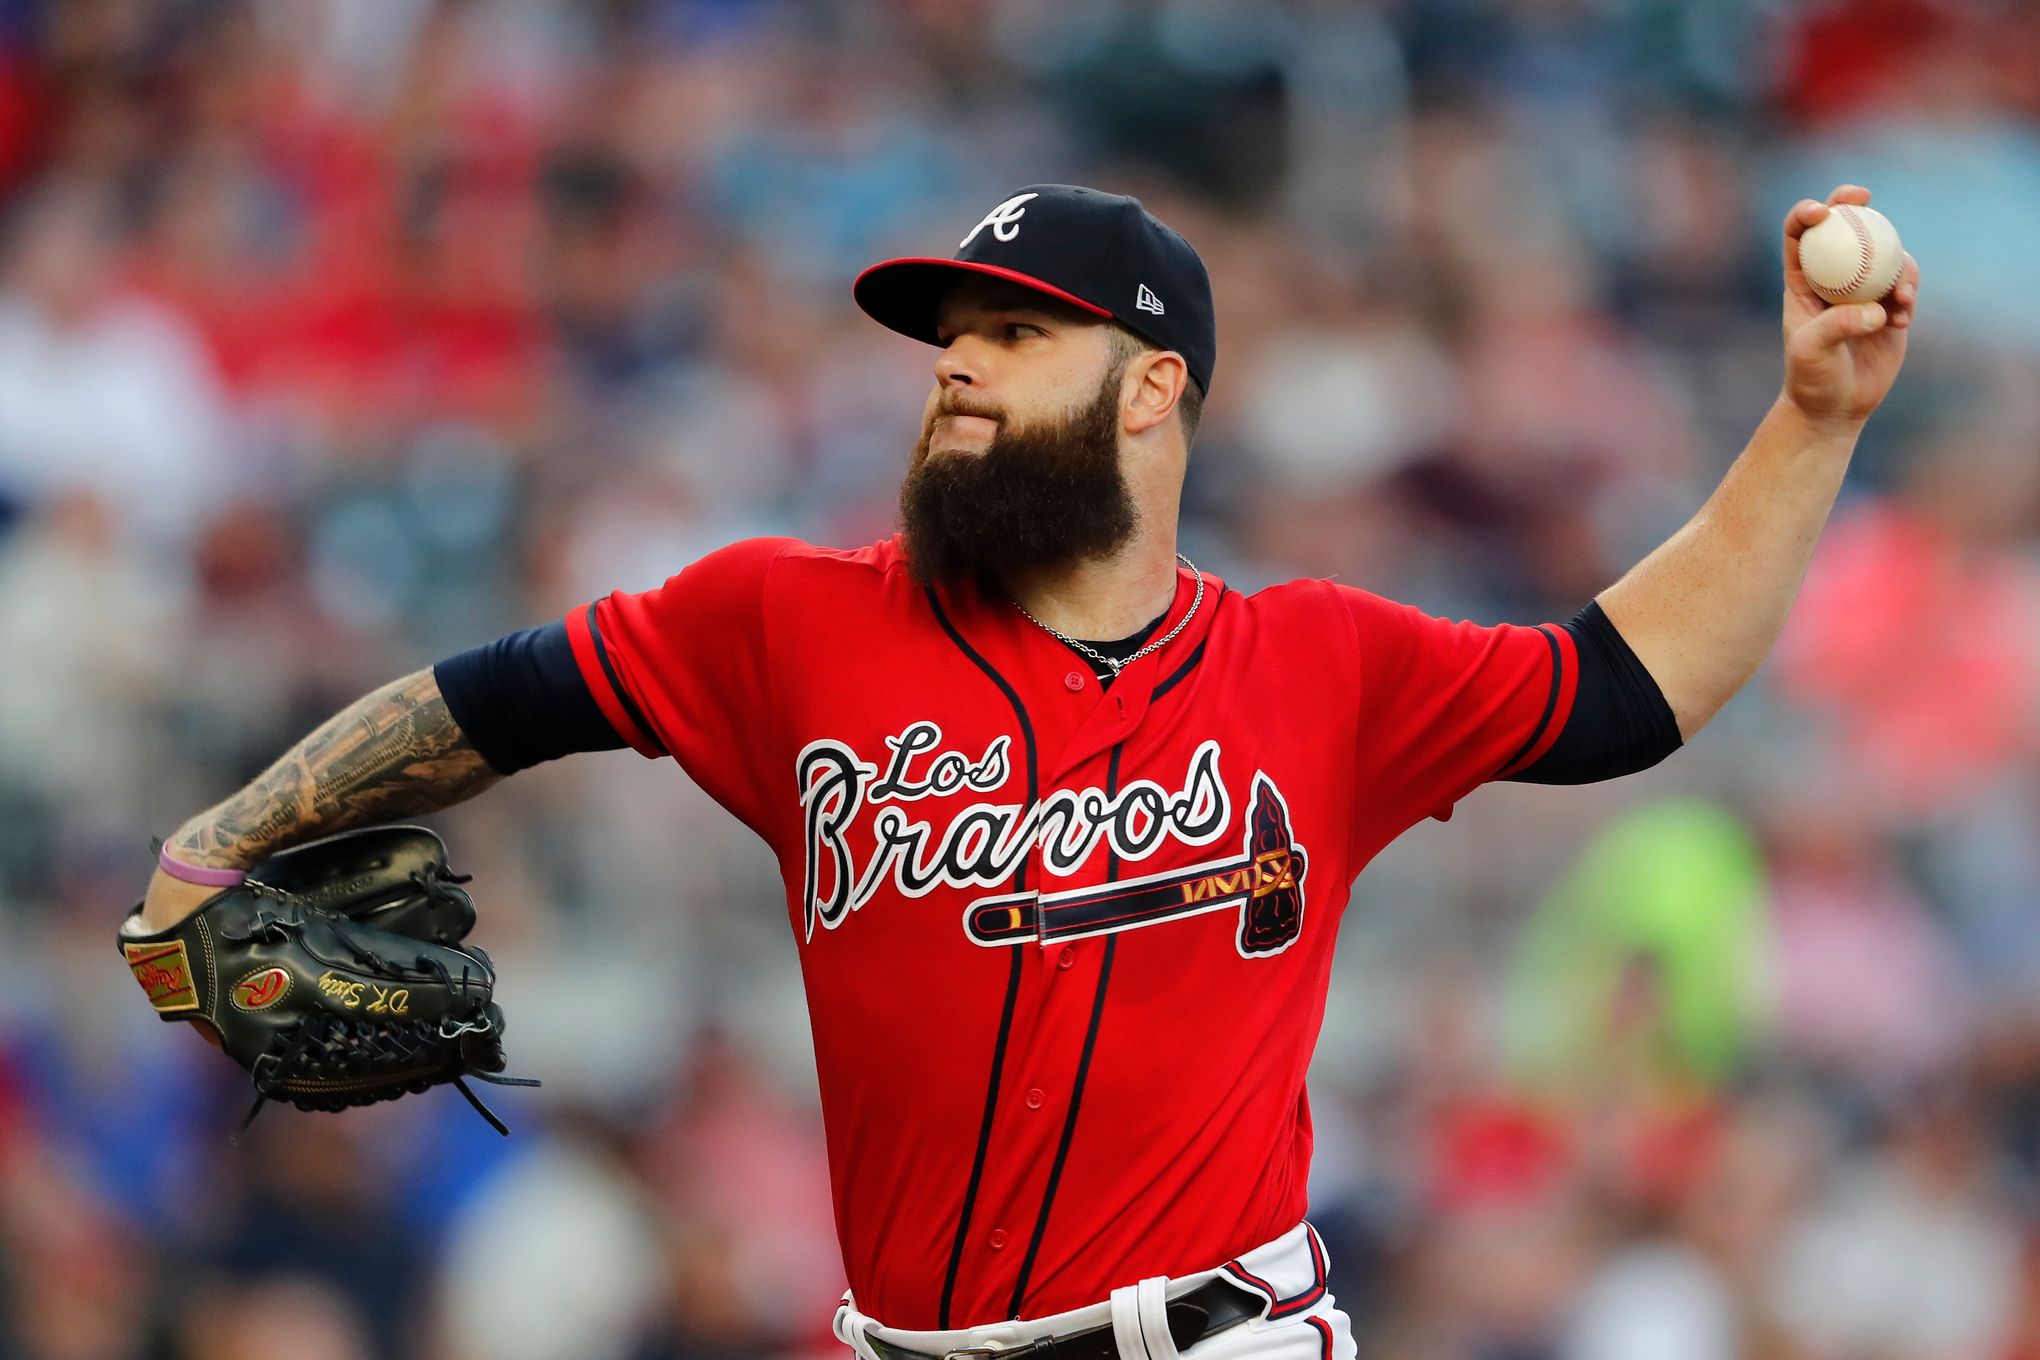 Albies, Donaldson back Keuchel in another Braves win